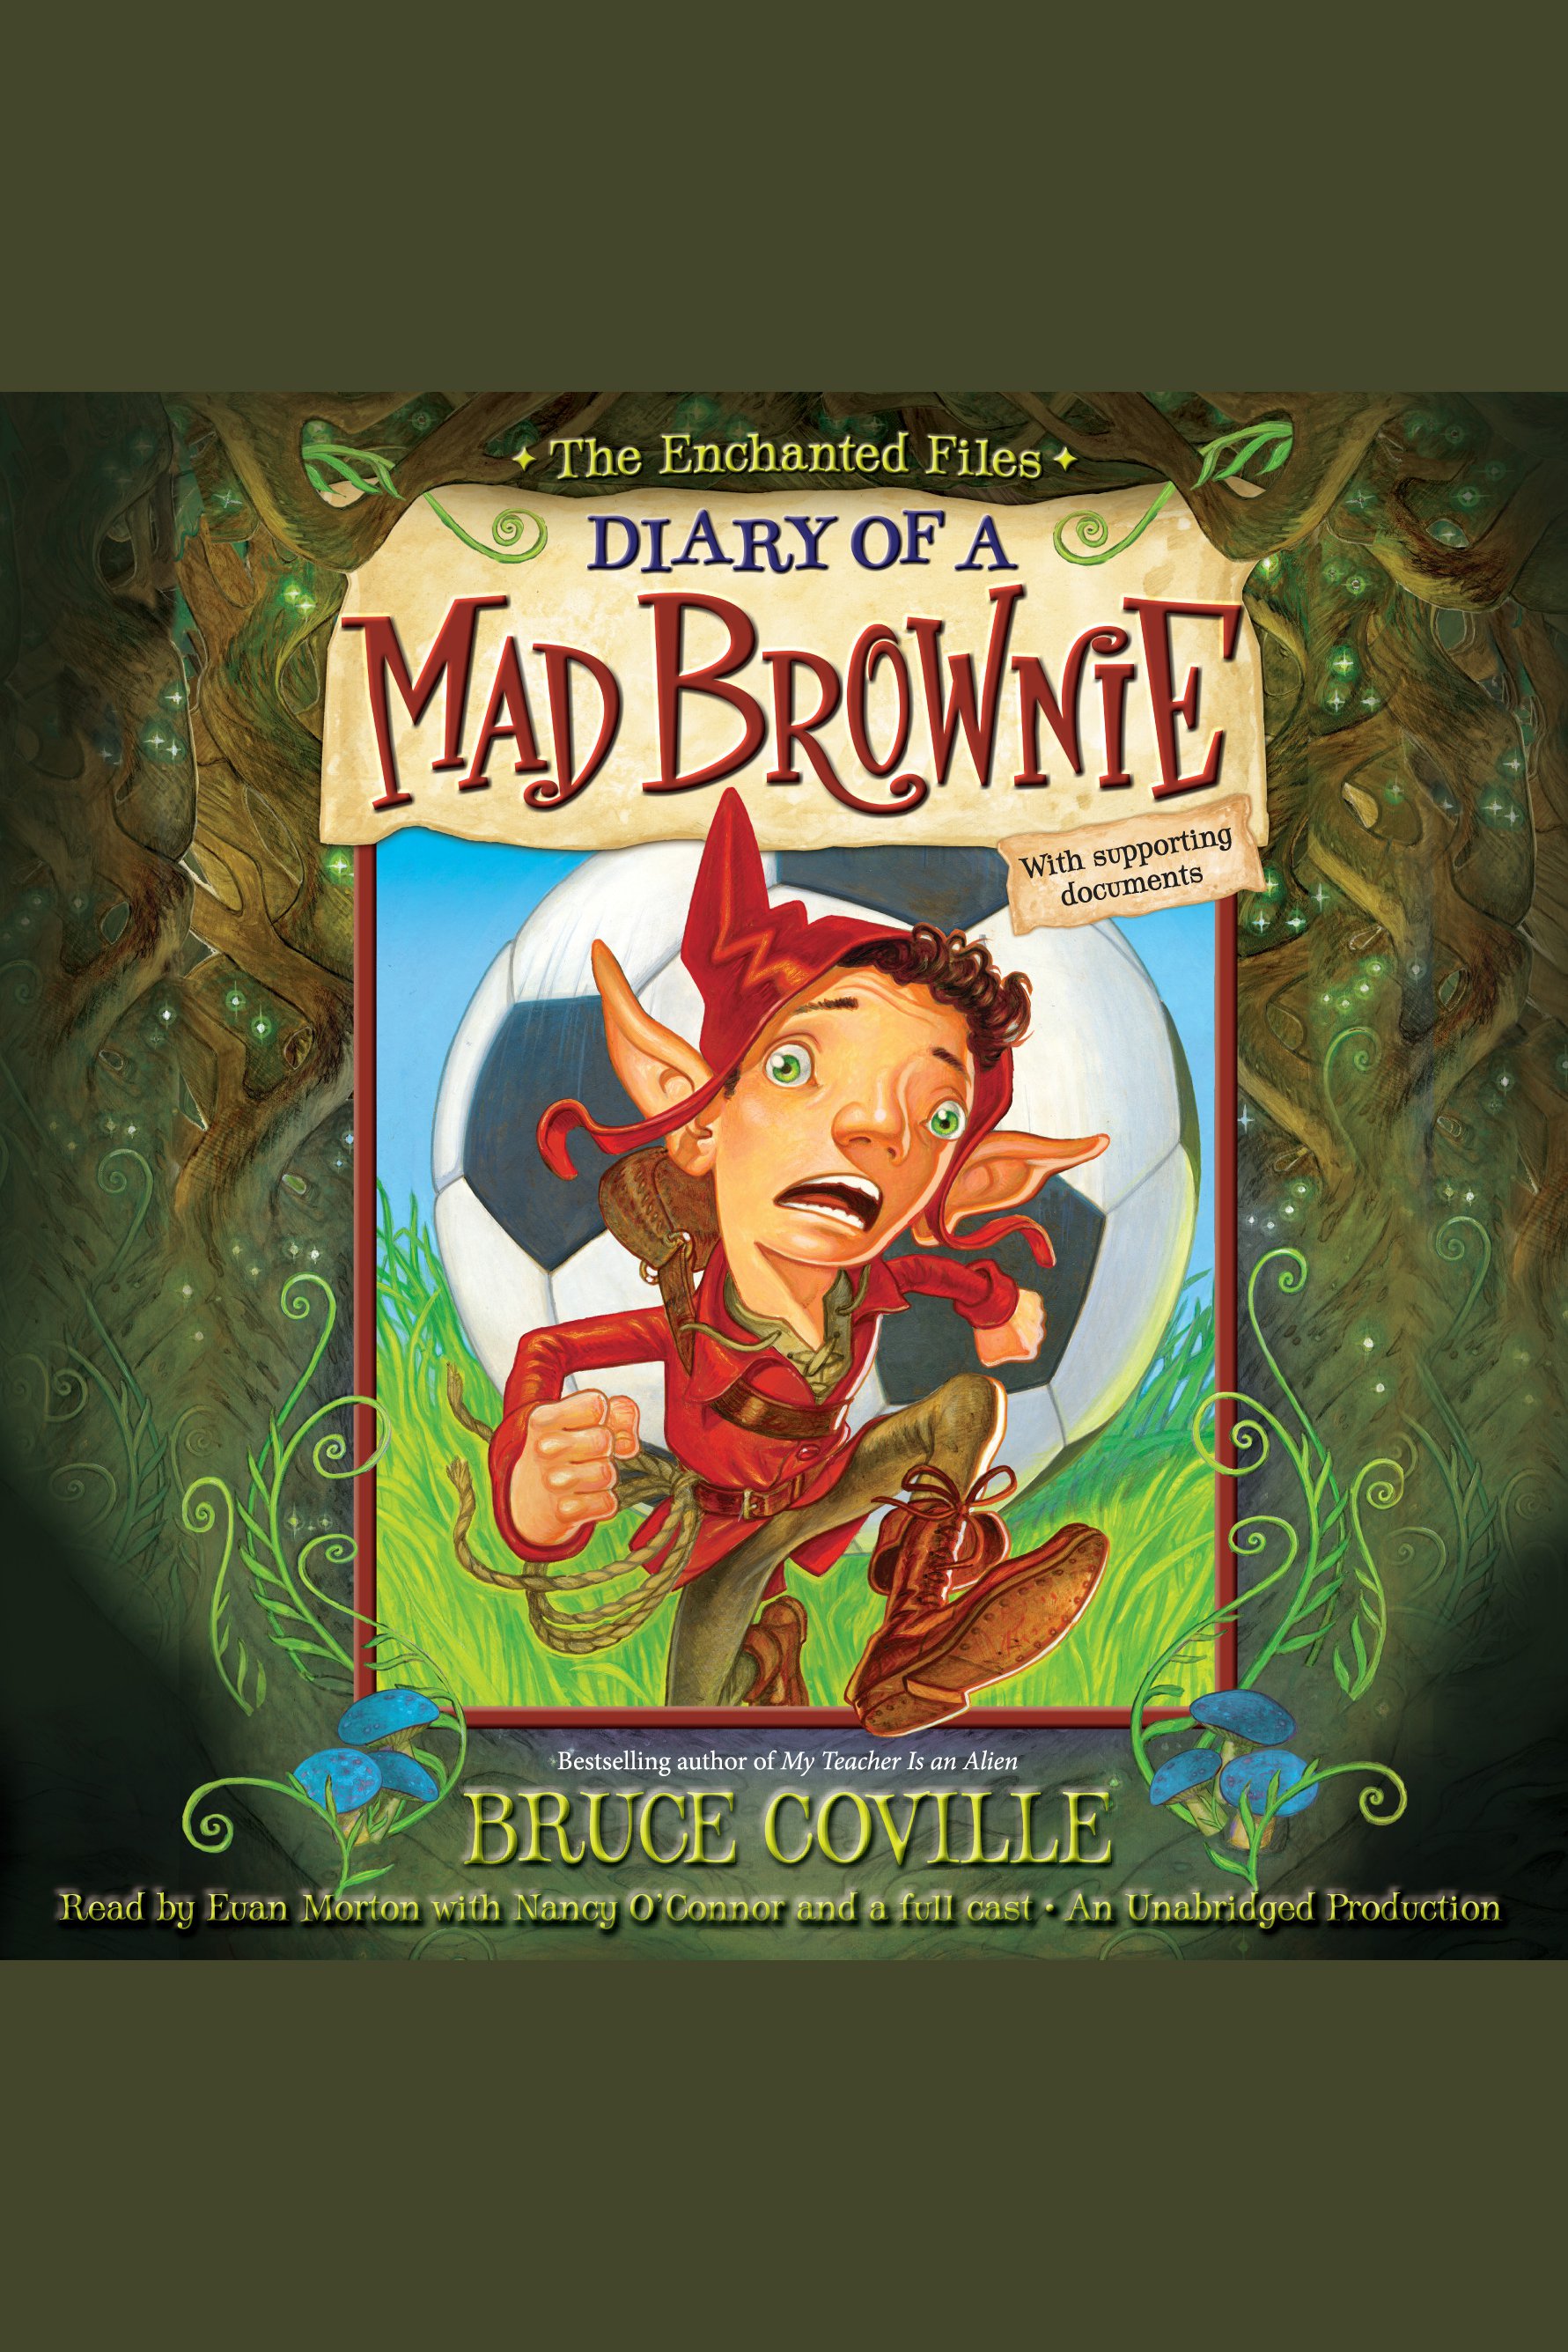 Diary of a mad brownie with supporting documents cover image